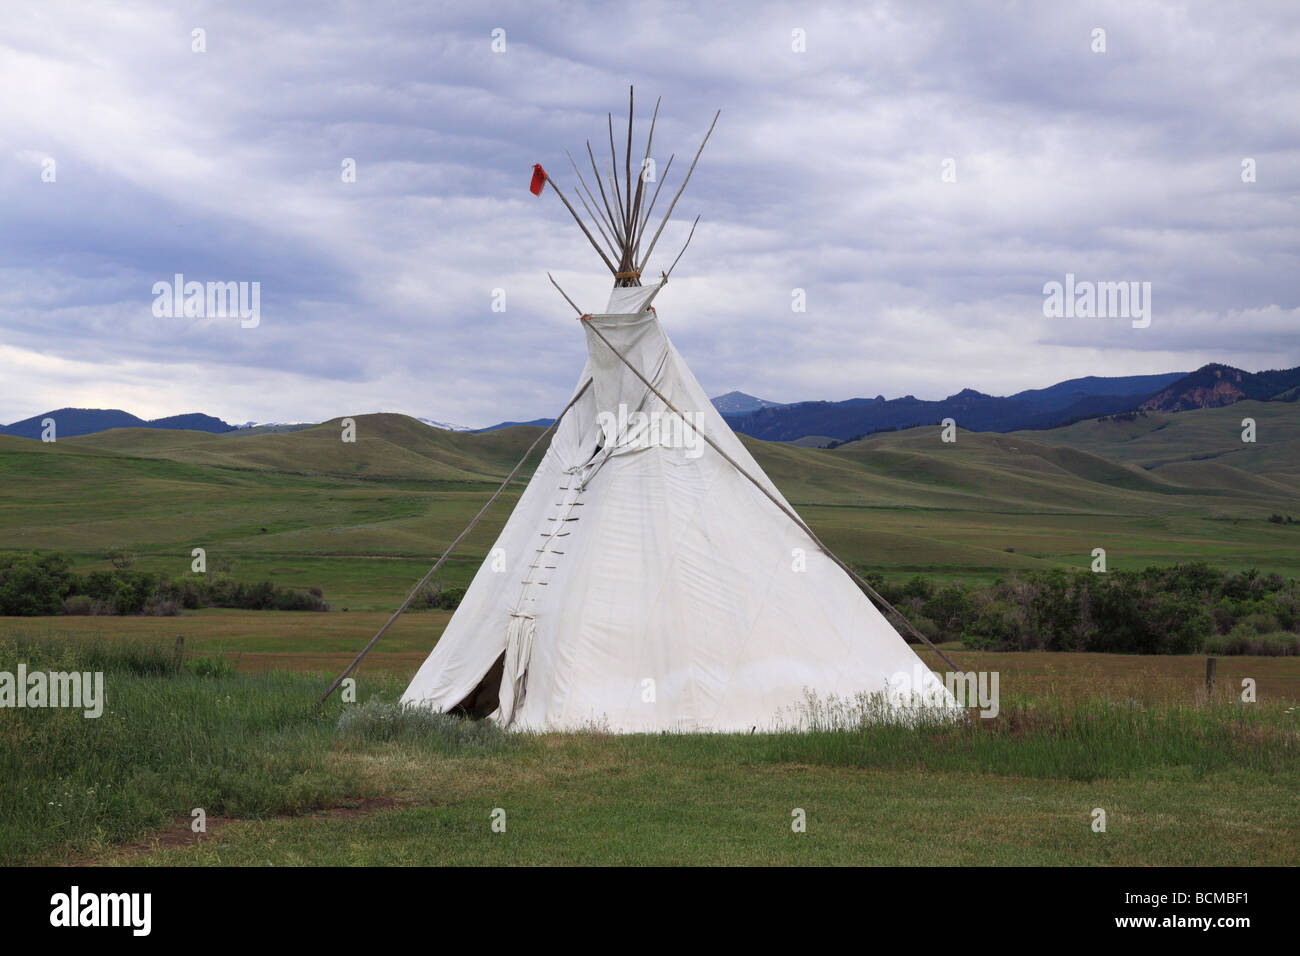 Plains Indian Tepee in the foothills Stock Photo